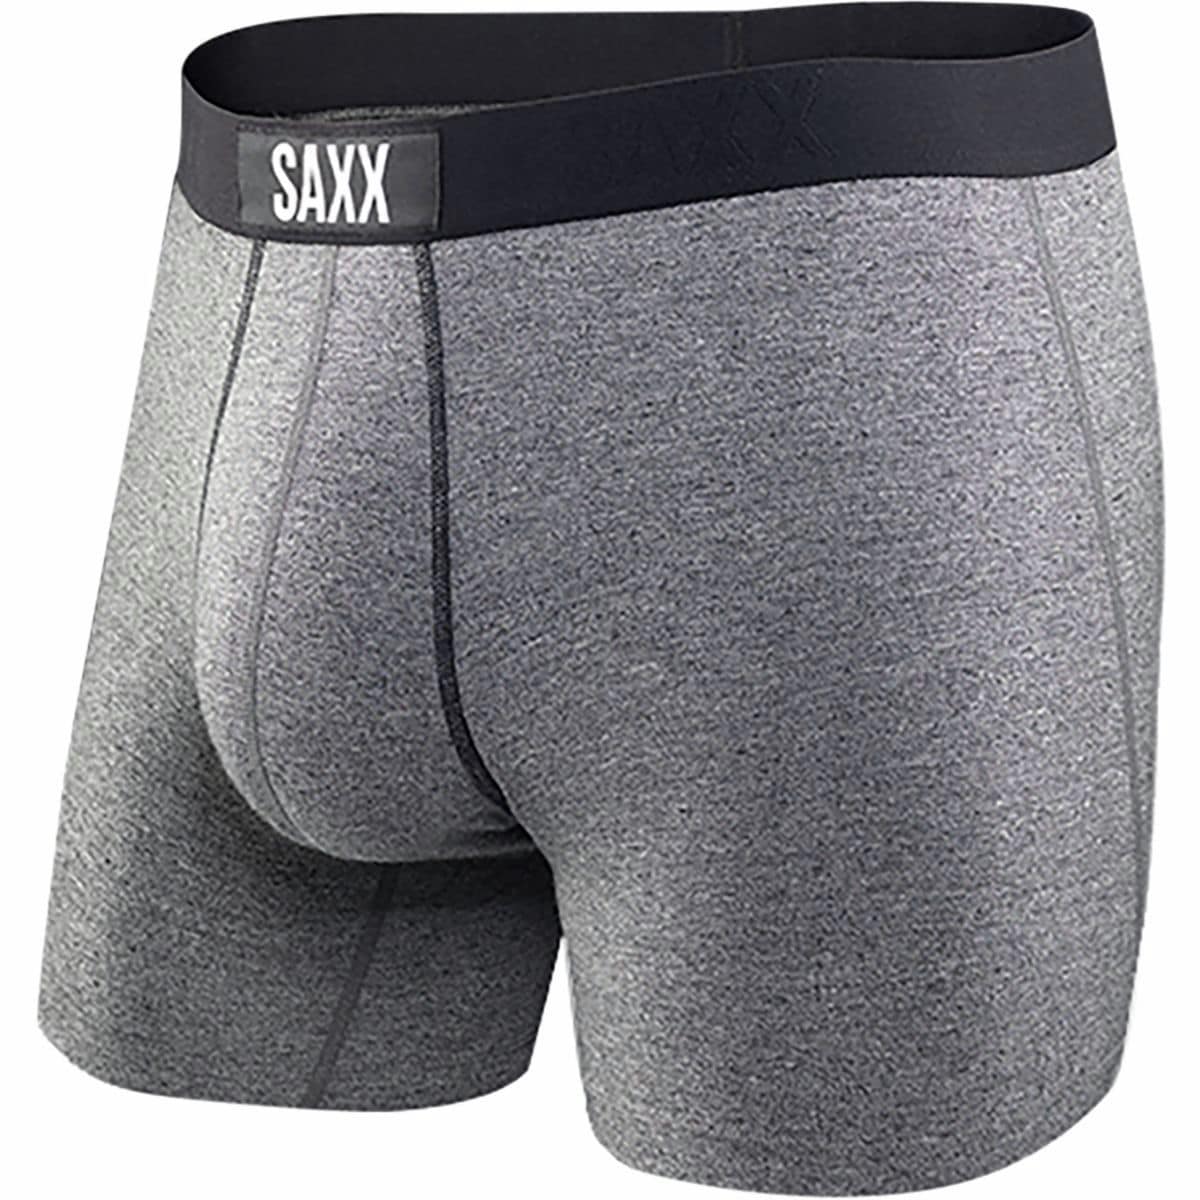 SAXX Vibe Modern Fit Boxer - 2 Pack - Men's - Clothing